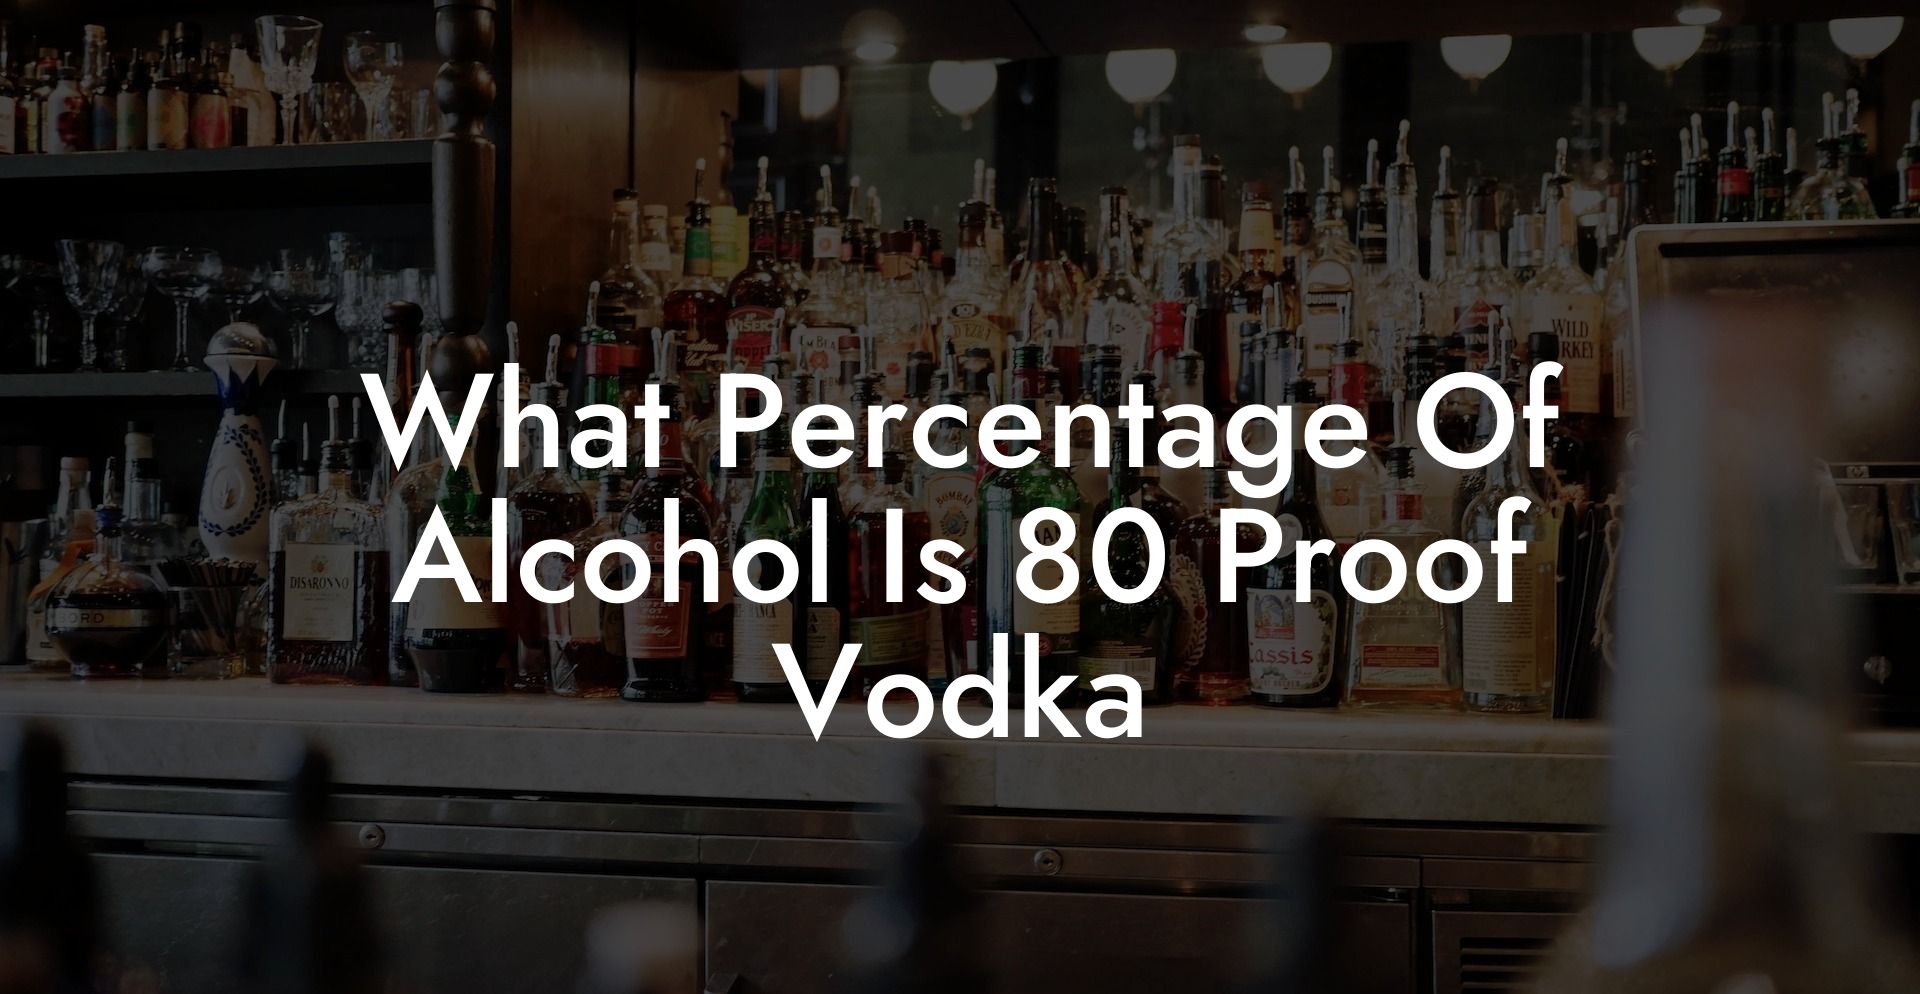 What Percentage Of Alcohol Is 80 Proof Vodka